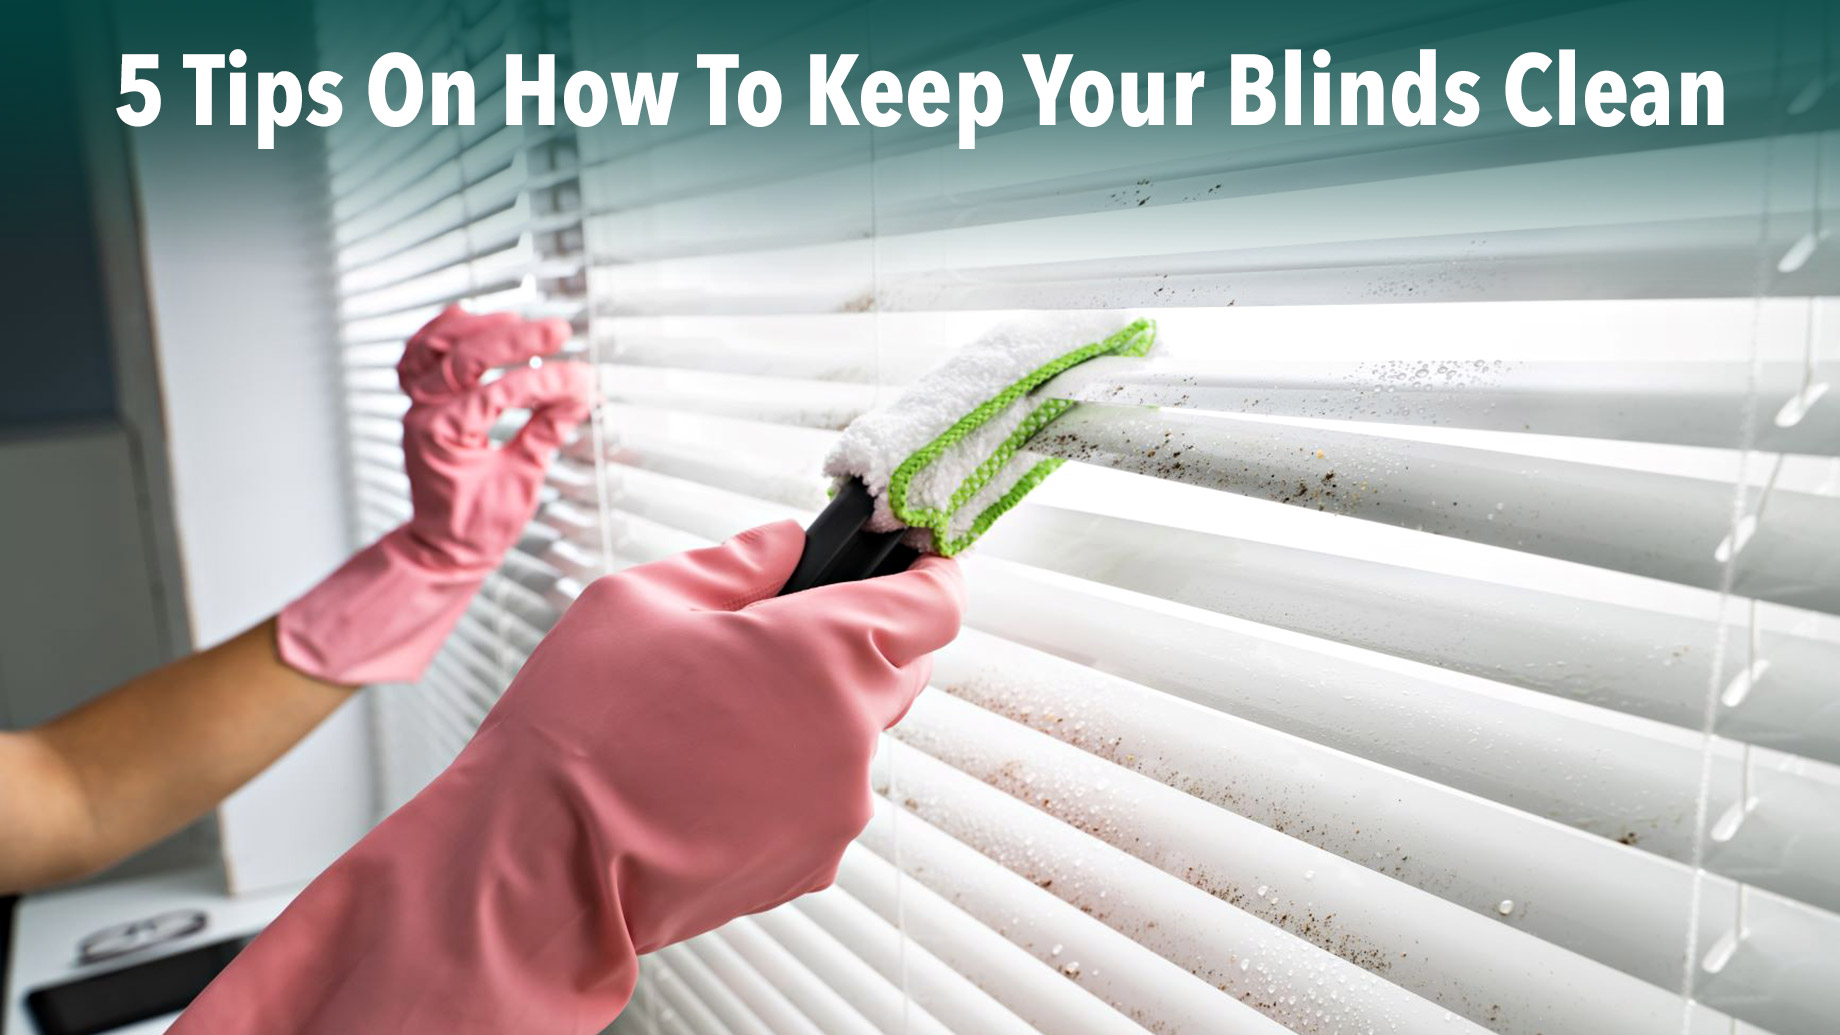 5 Tips On How To Keep Your Blinds Clean